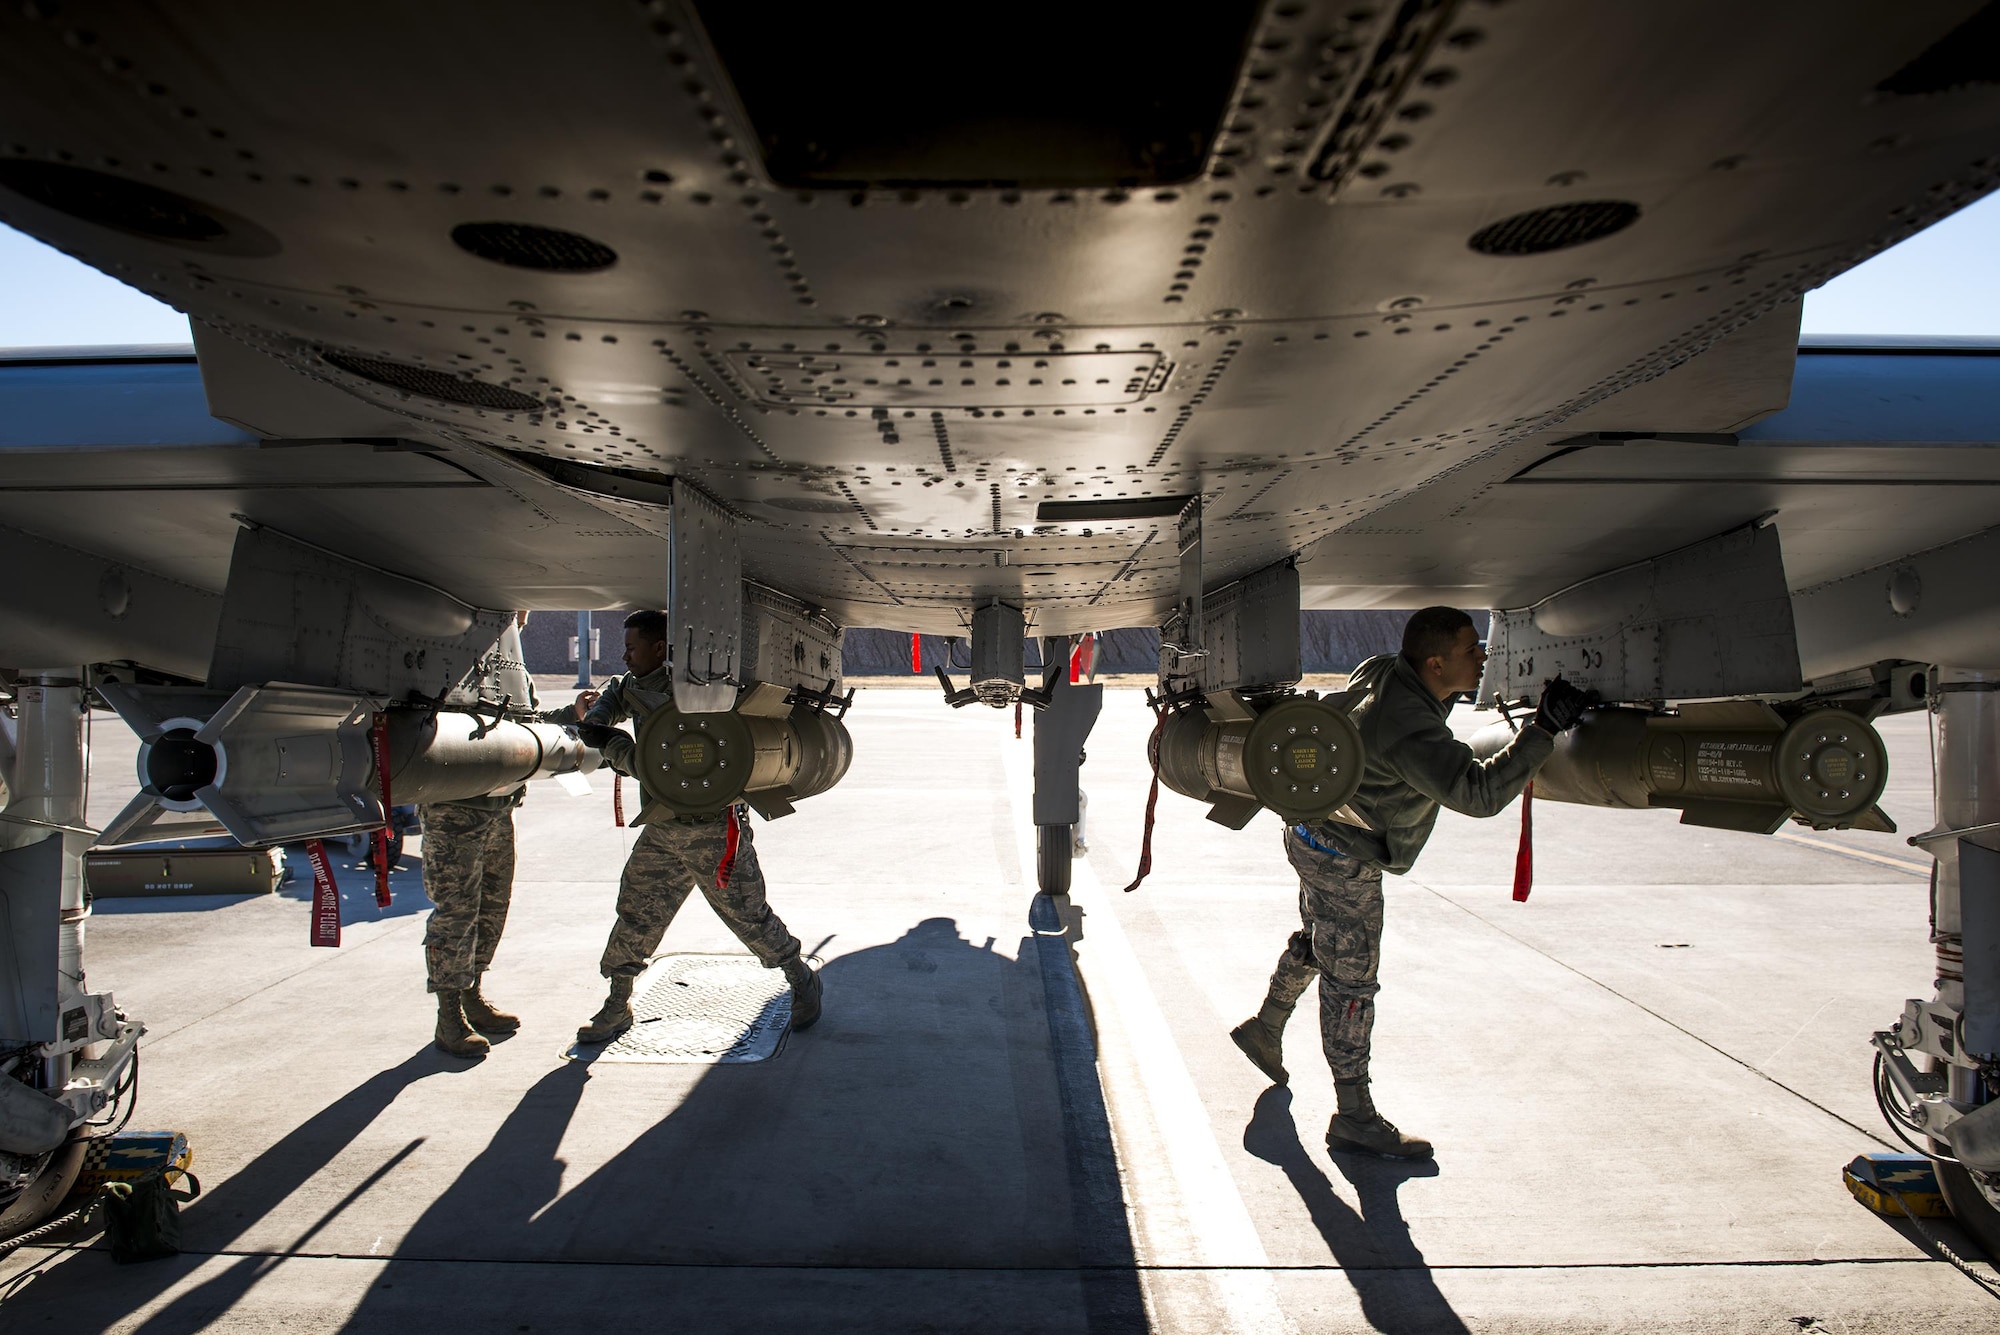 A weapons load team conducts final checks on munitions underneath an A-10C Thunderbolt II during Green Flag-West 17-03, Jan. 24, 2017, at Nellis Air Force Base, Nev. Weapons Airmen enabled joint force training during the two-week exercise by loading weapons, inspecting jets and maintaining munitions systems. Some of the live munitions included the Mark 82 and 84 general purpose bombs, high-explosive incendiary 30mm rounds and the 500 pound GBU-12 Paveway II laser-guided bomb. (U.S. Air Force photo by Staff Sgt. Ryan Callaghan)